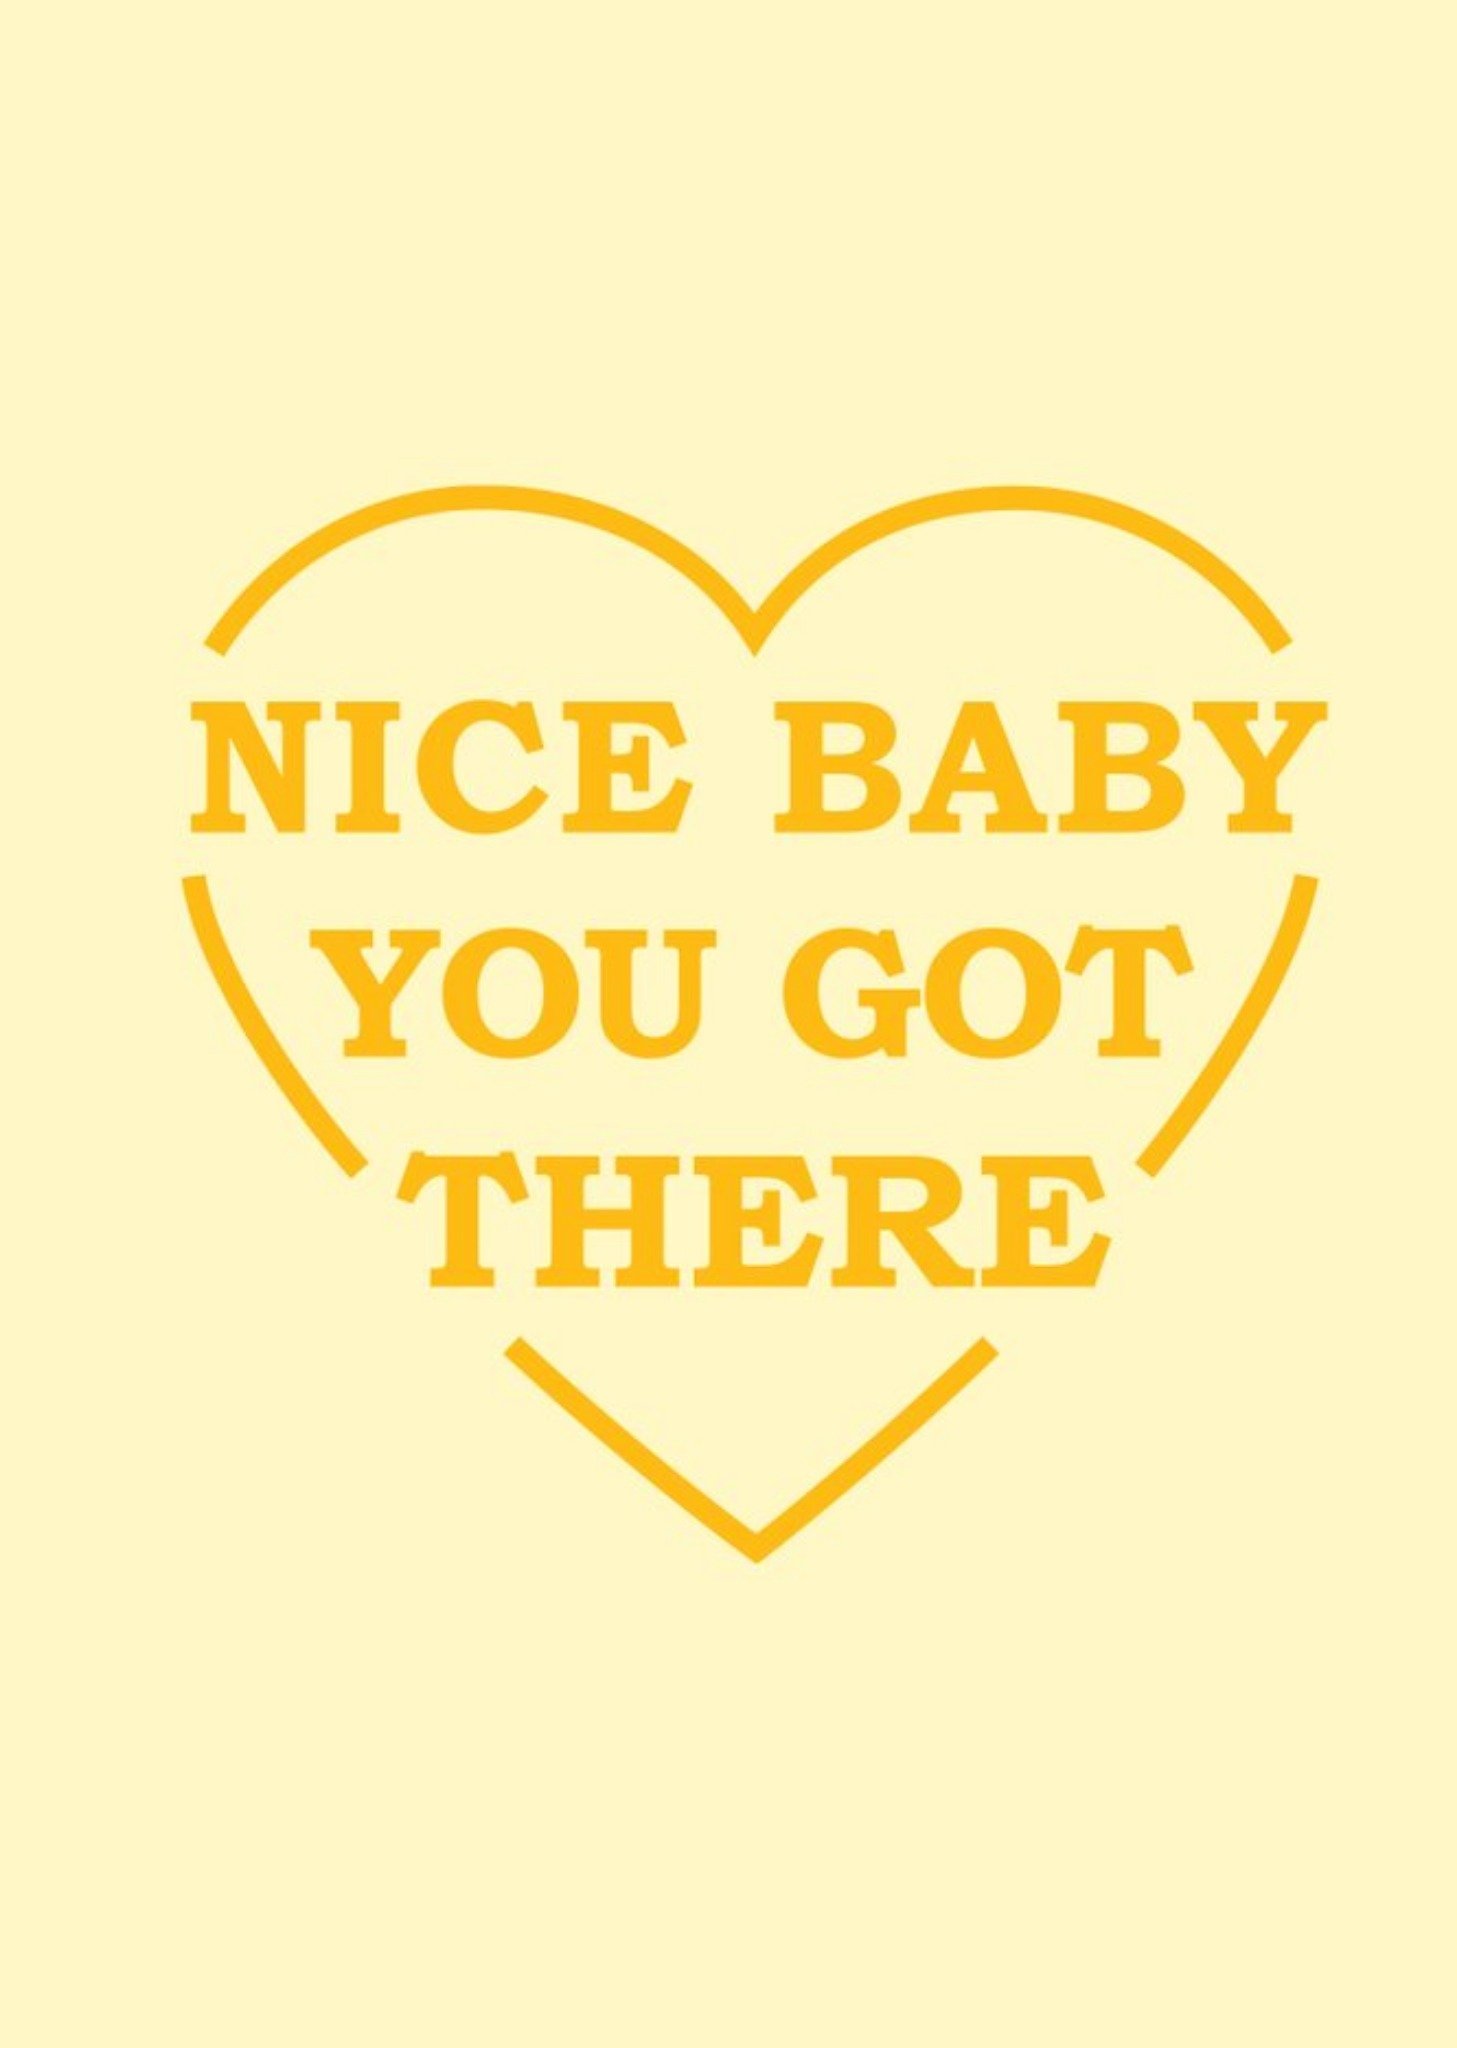 Moonpig Orange Typography Inside A Heart Shape On A Yellow Background New Baby Congratulations Card,